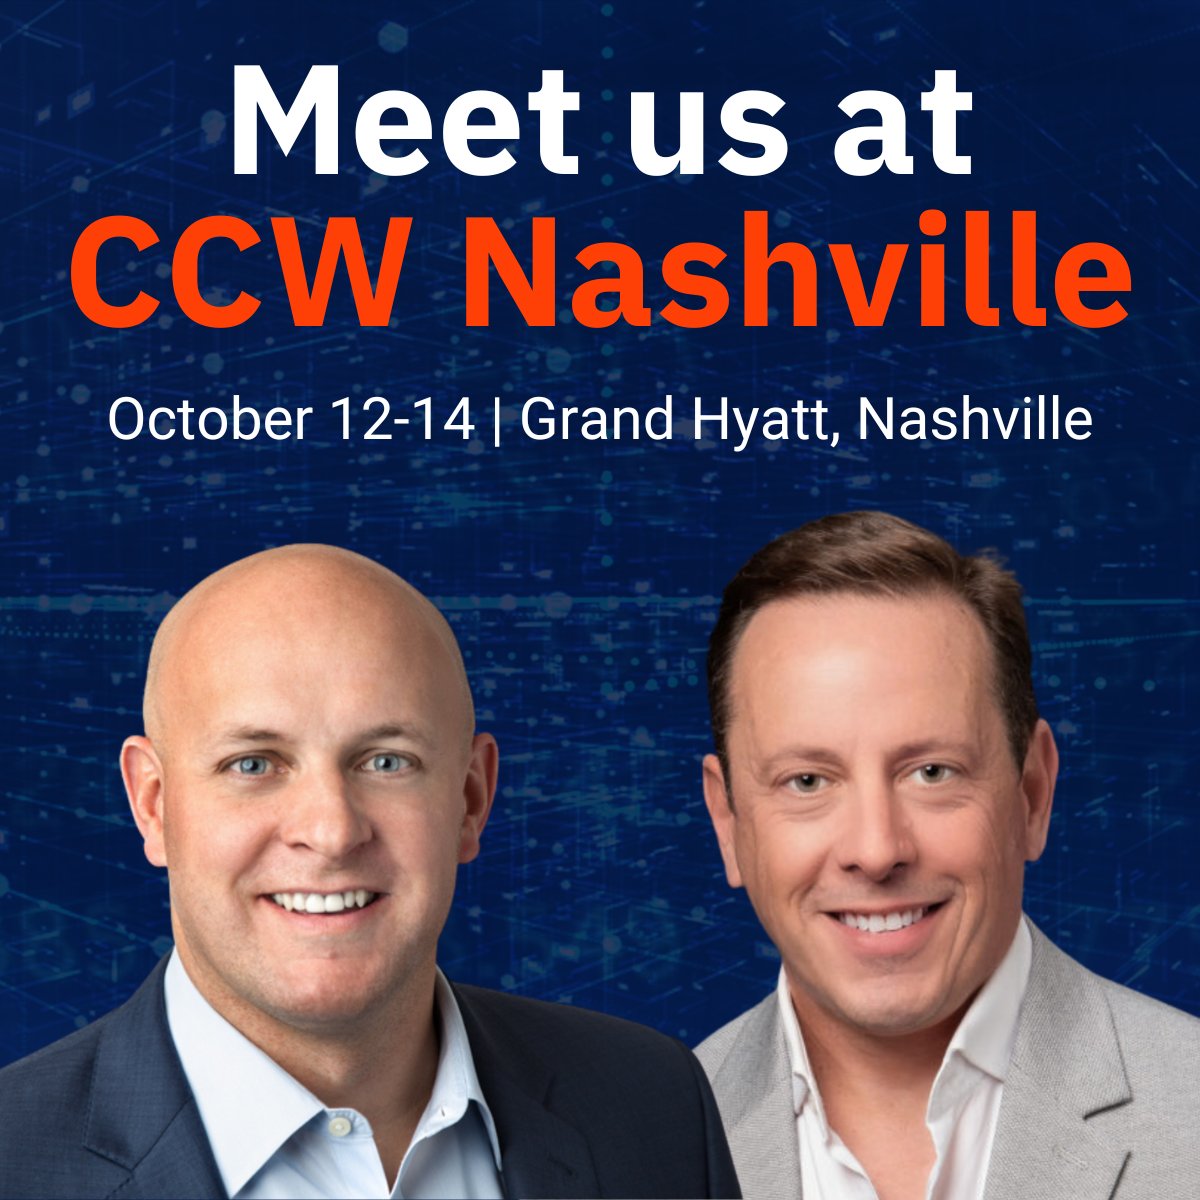 Attending #CCWNashville next week? Be sure to meet the Cloudlinx team to learn how you can migrate to a cloud CX solution seamlessly. If you haven't registered yet and are interested in going, click here to view the agenda: hubs.ly/Q01p88sx0 #CustomerContactWeek